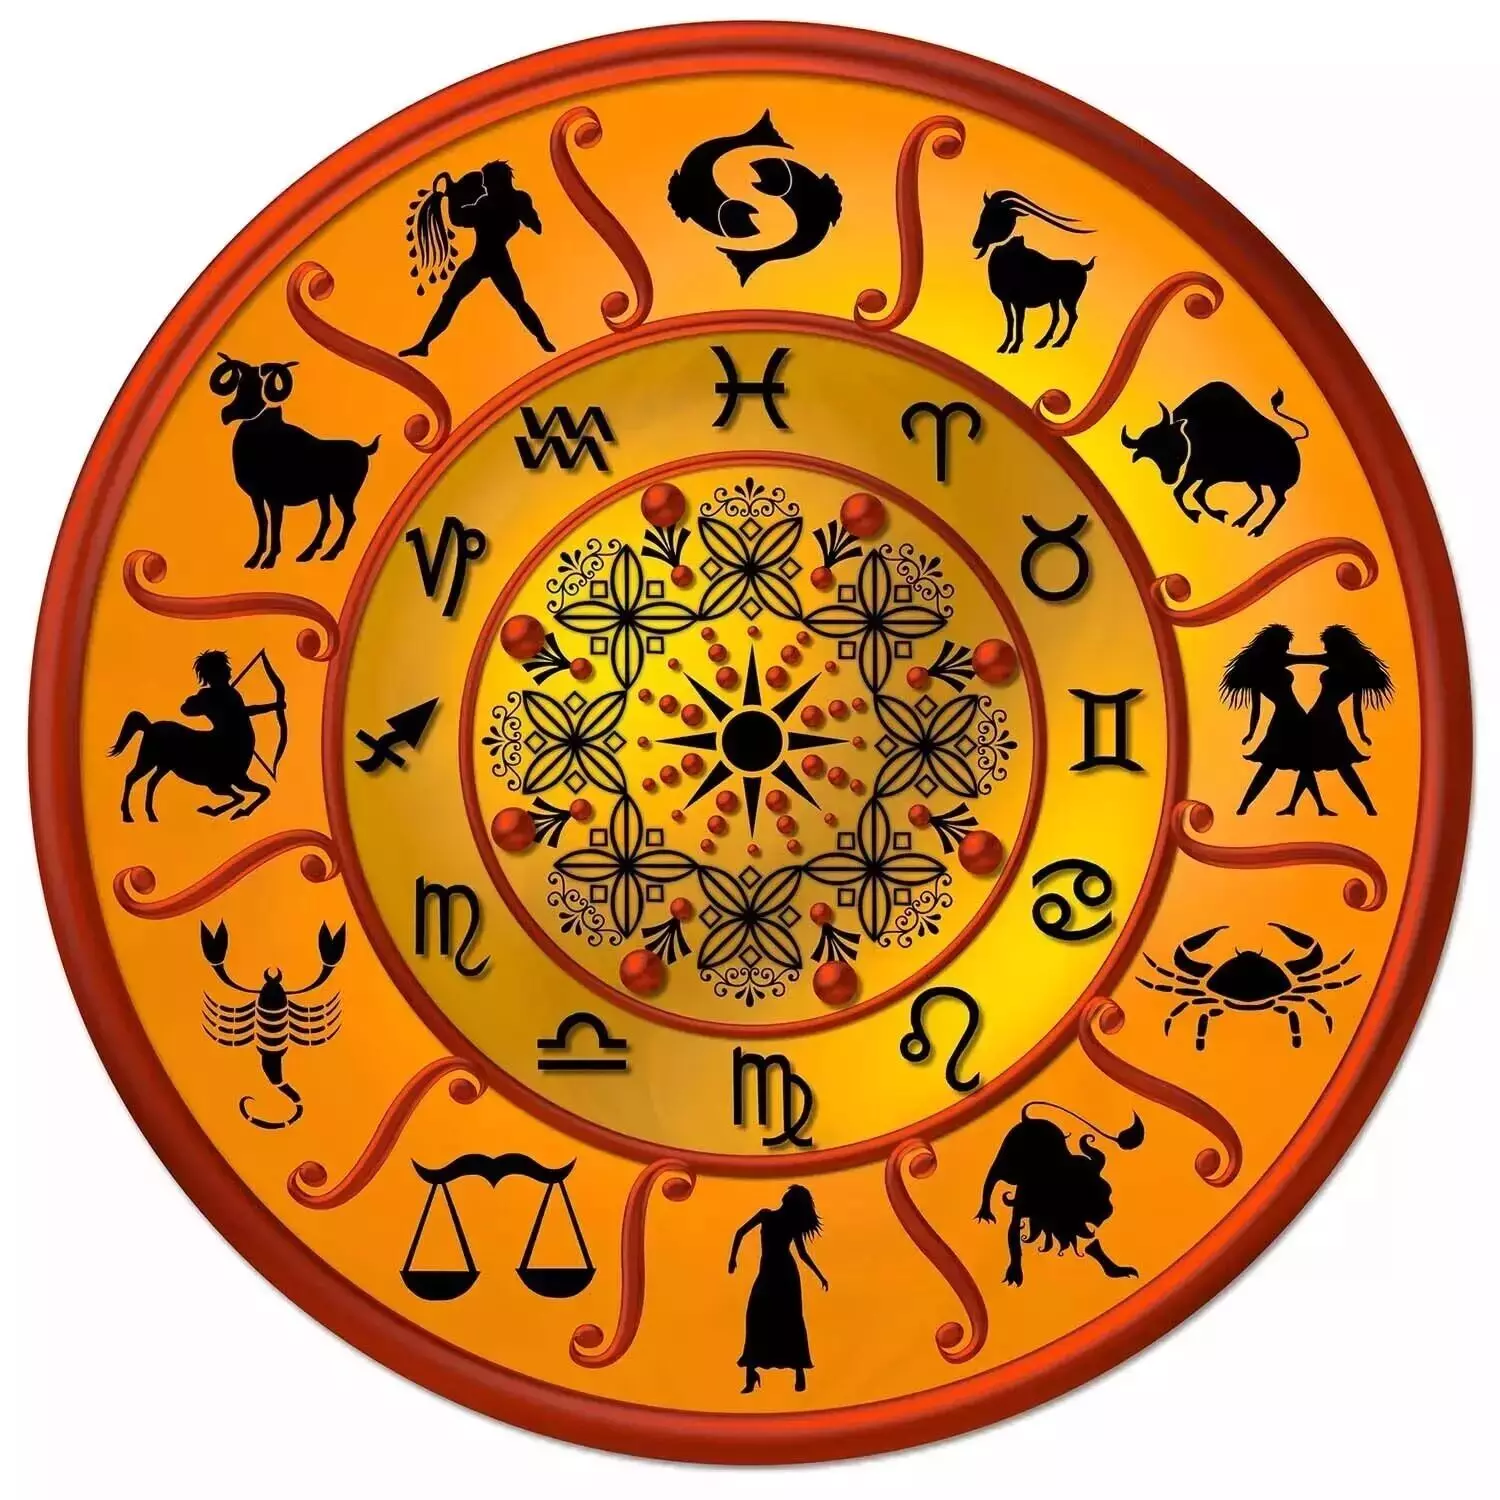 22 June  – Know your todays horoscope